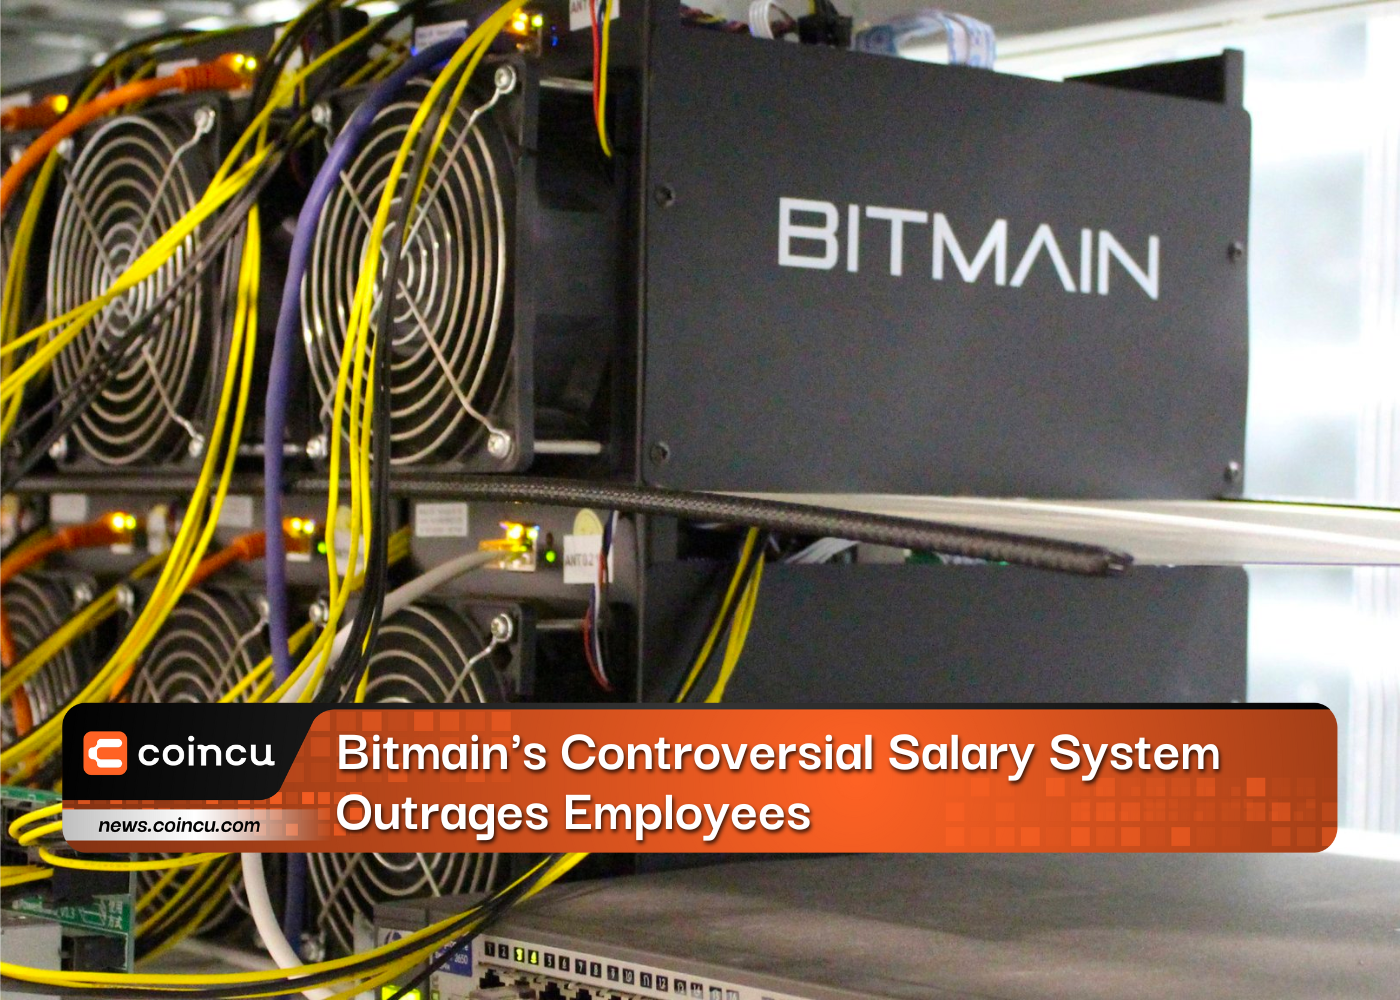 Bitmain's Controversial Salary System Outrages Employees